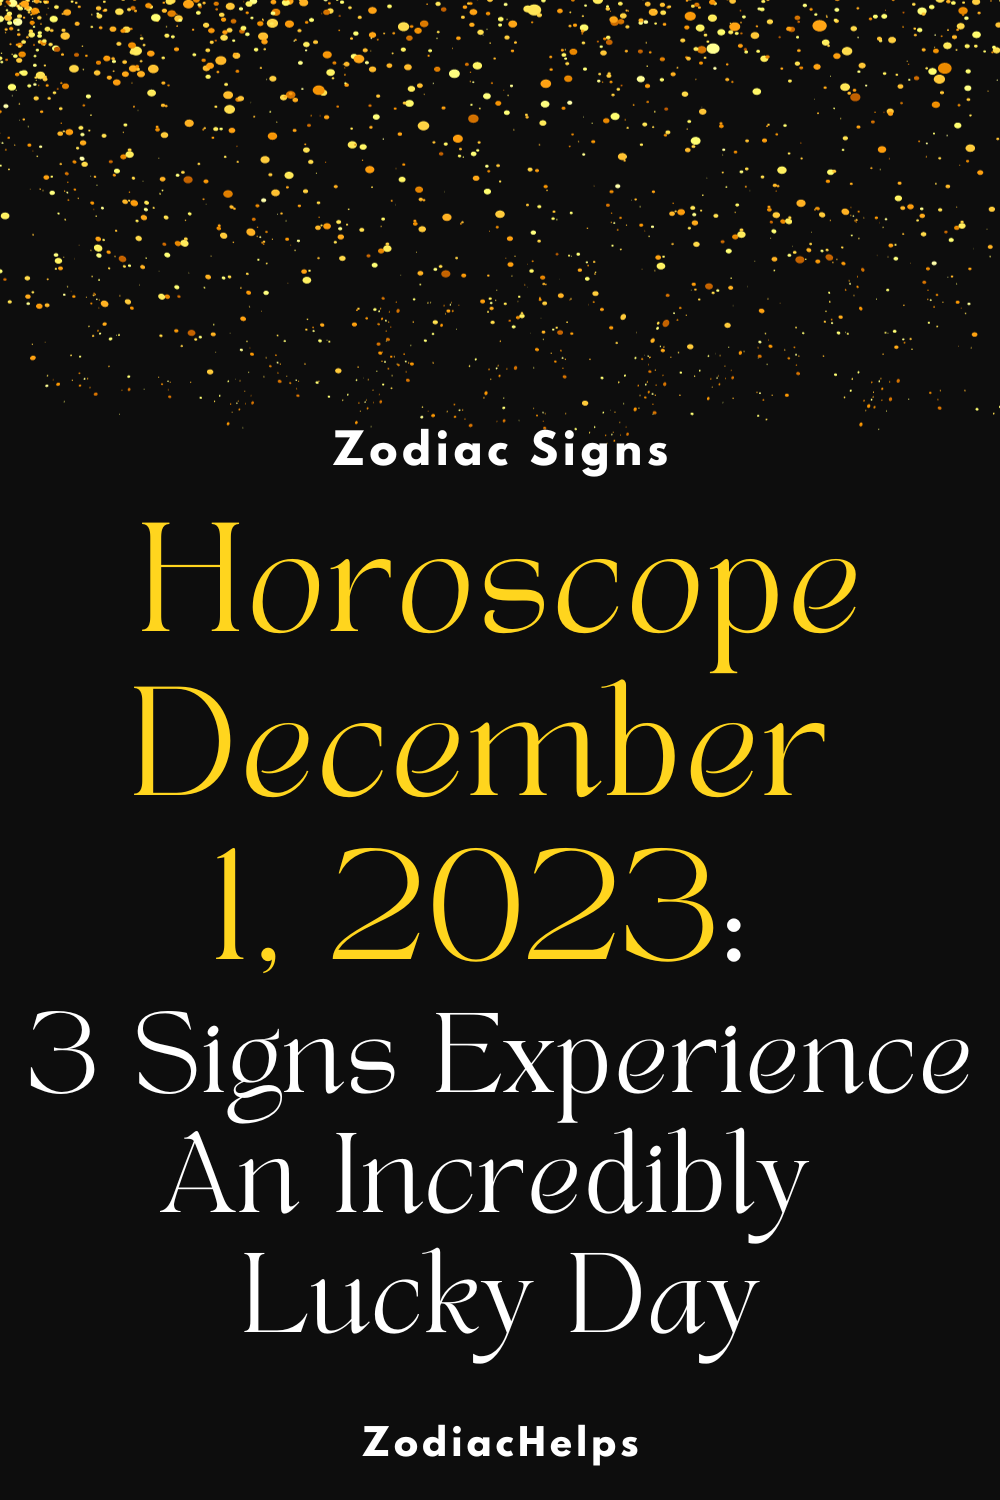 Horoscope December 1, 2023: 3 Signs Experience An Incredibly Lucky Day